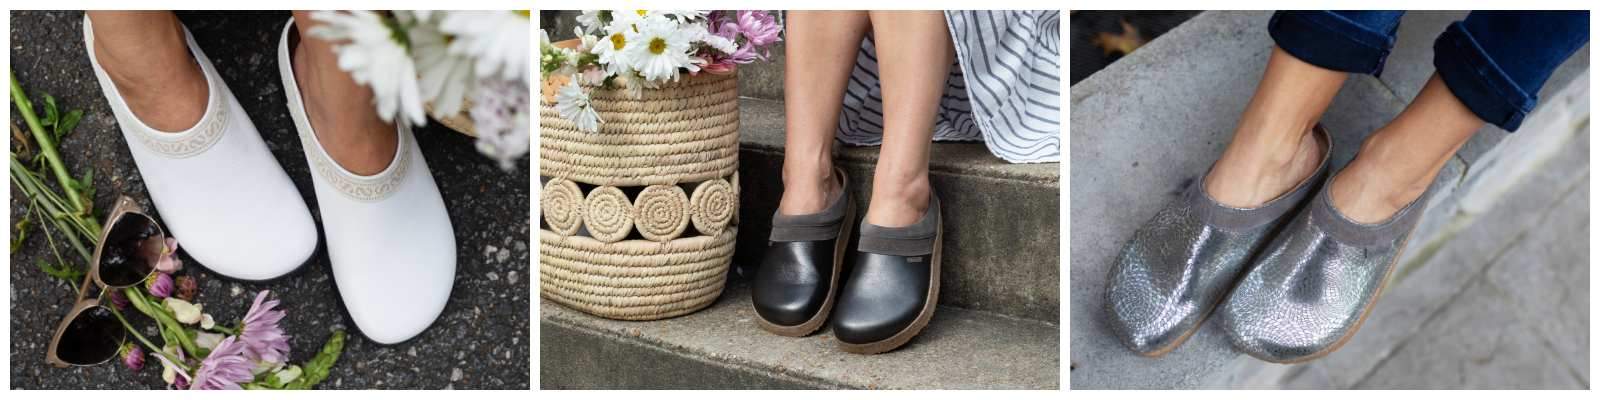 Why Clogs Are the Perfect Summer Shoes 